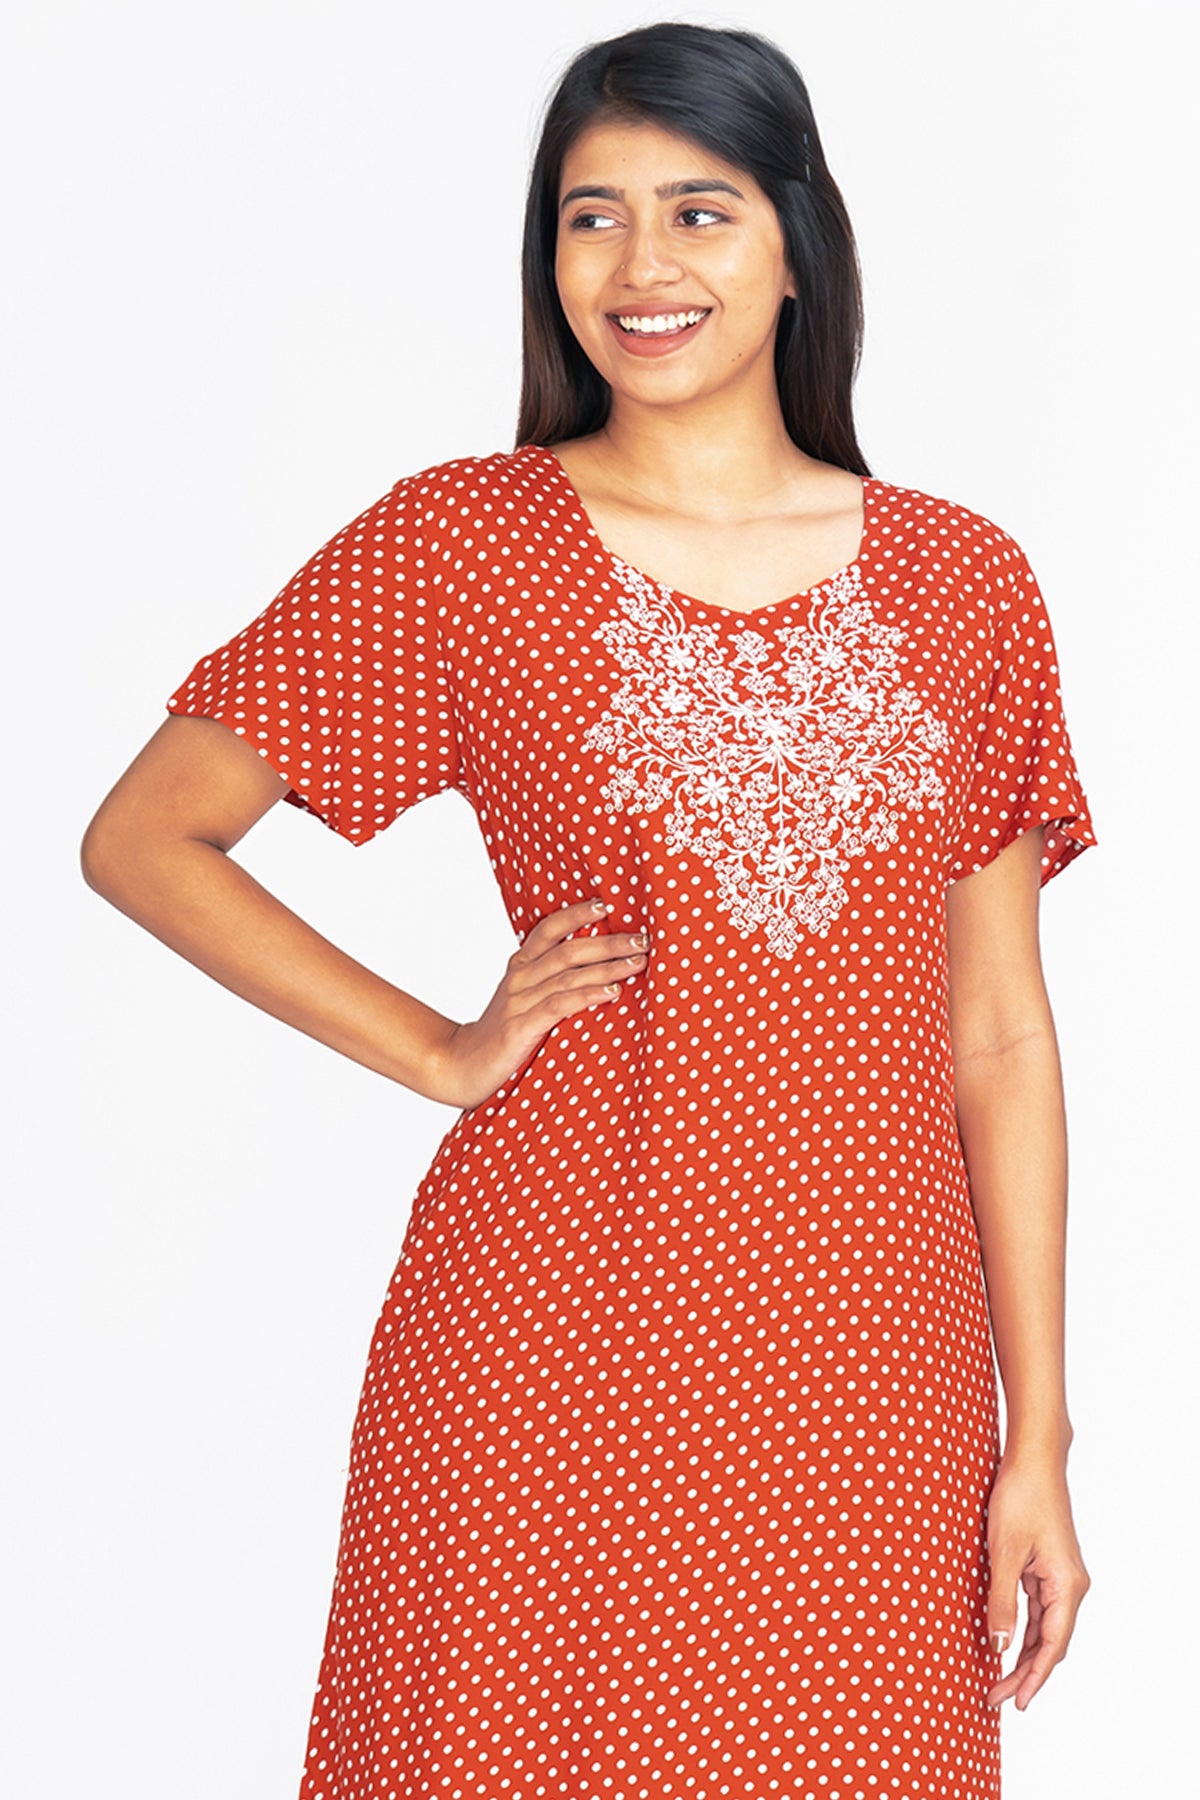 All Over Polka Dot Print With Contrast Floral Embroidered Yoke Nighty Red